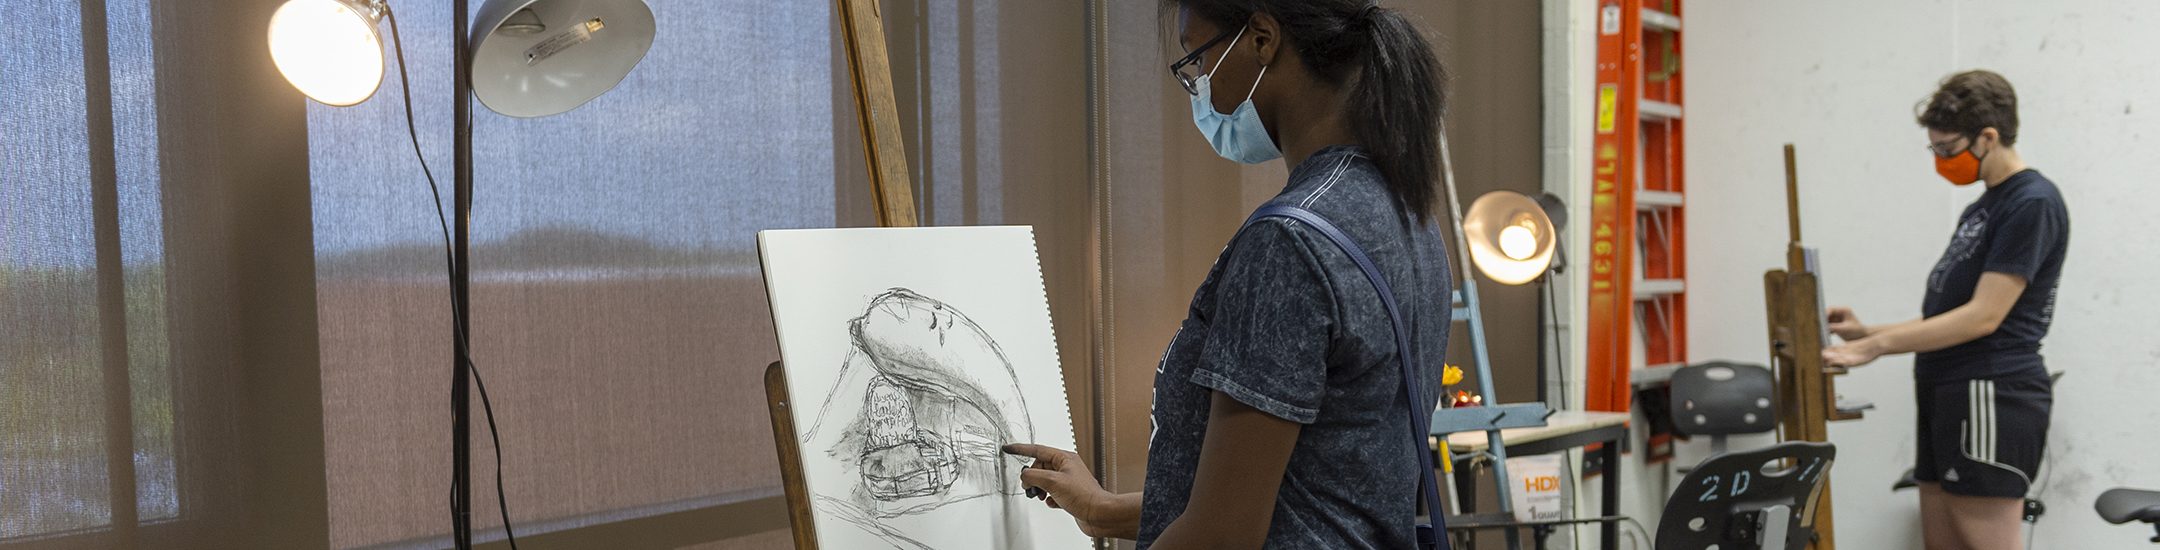 A student works on a still-life drawing in the studio.